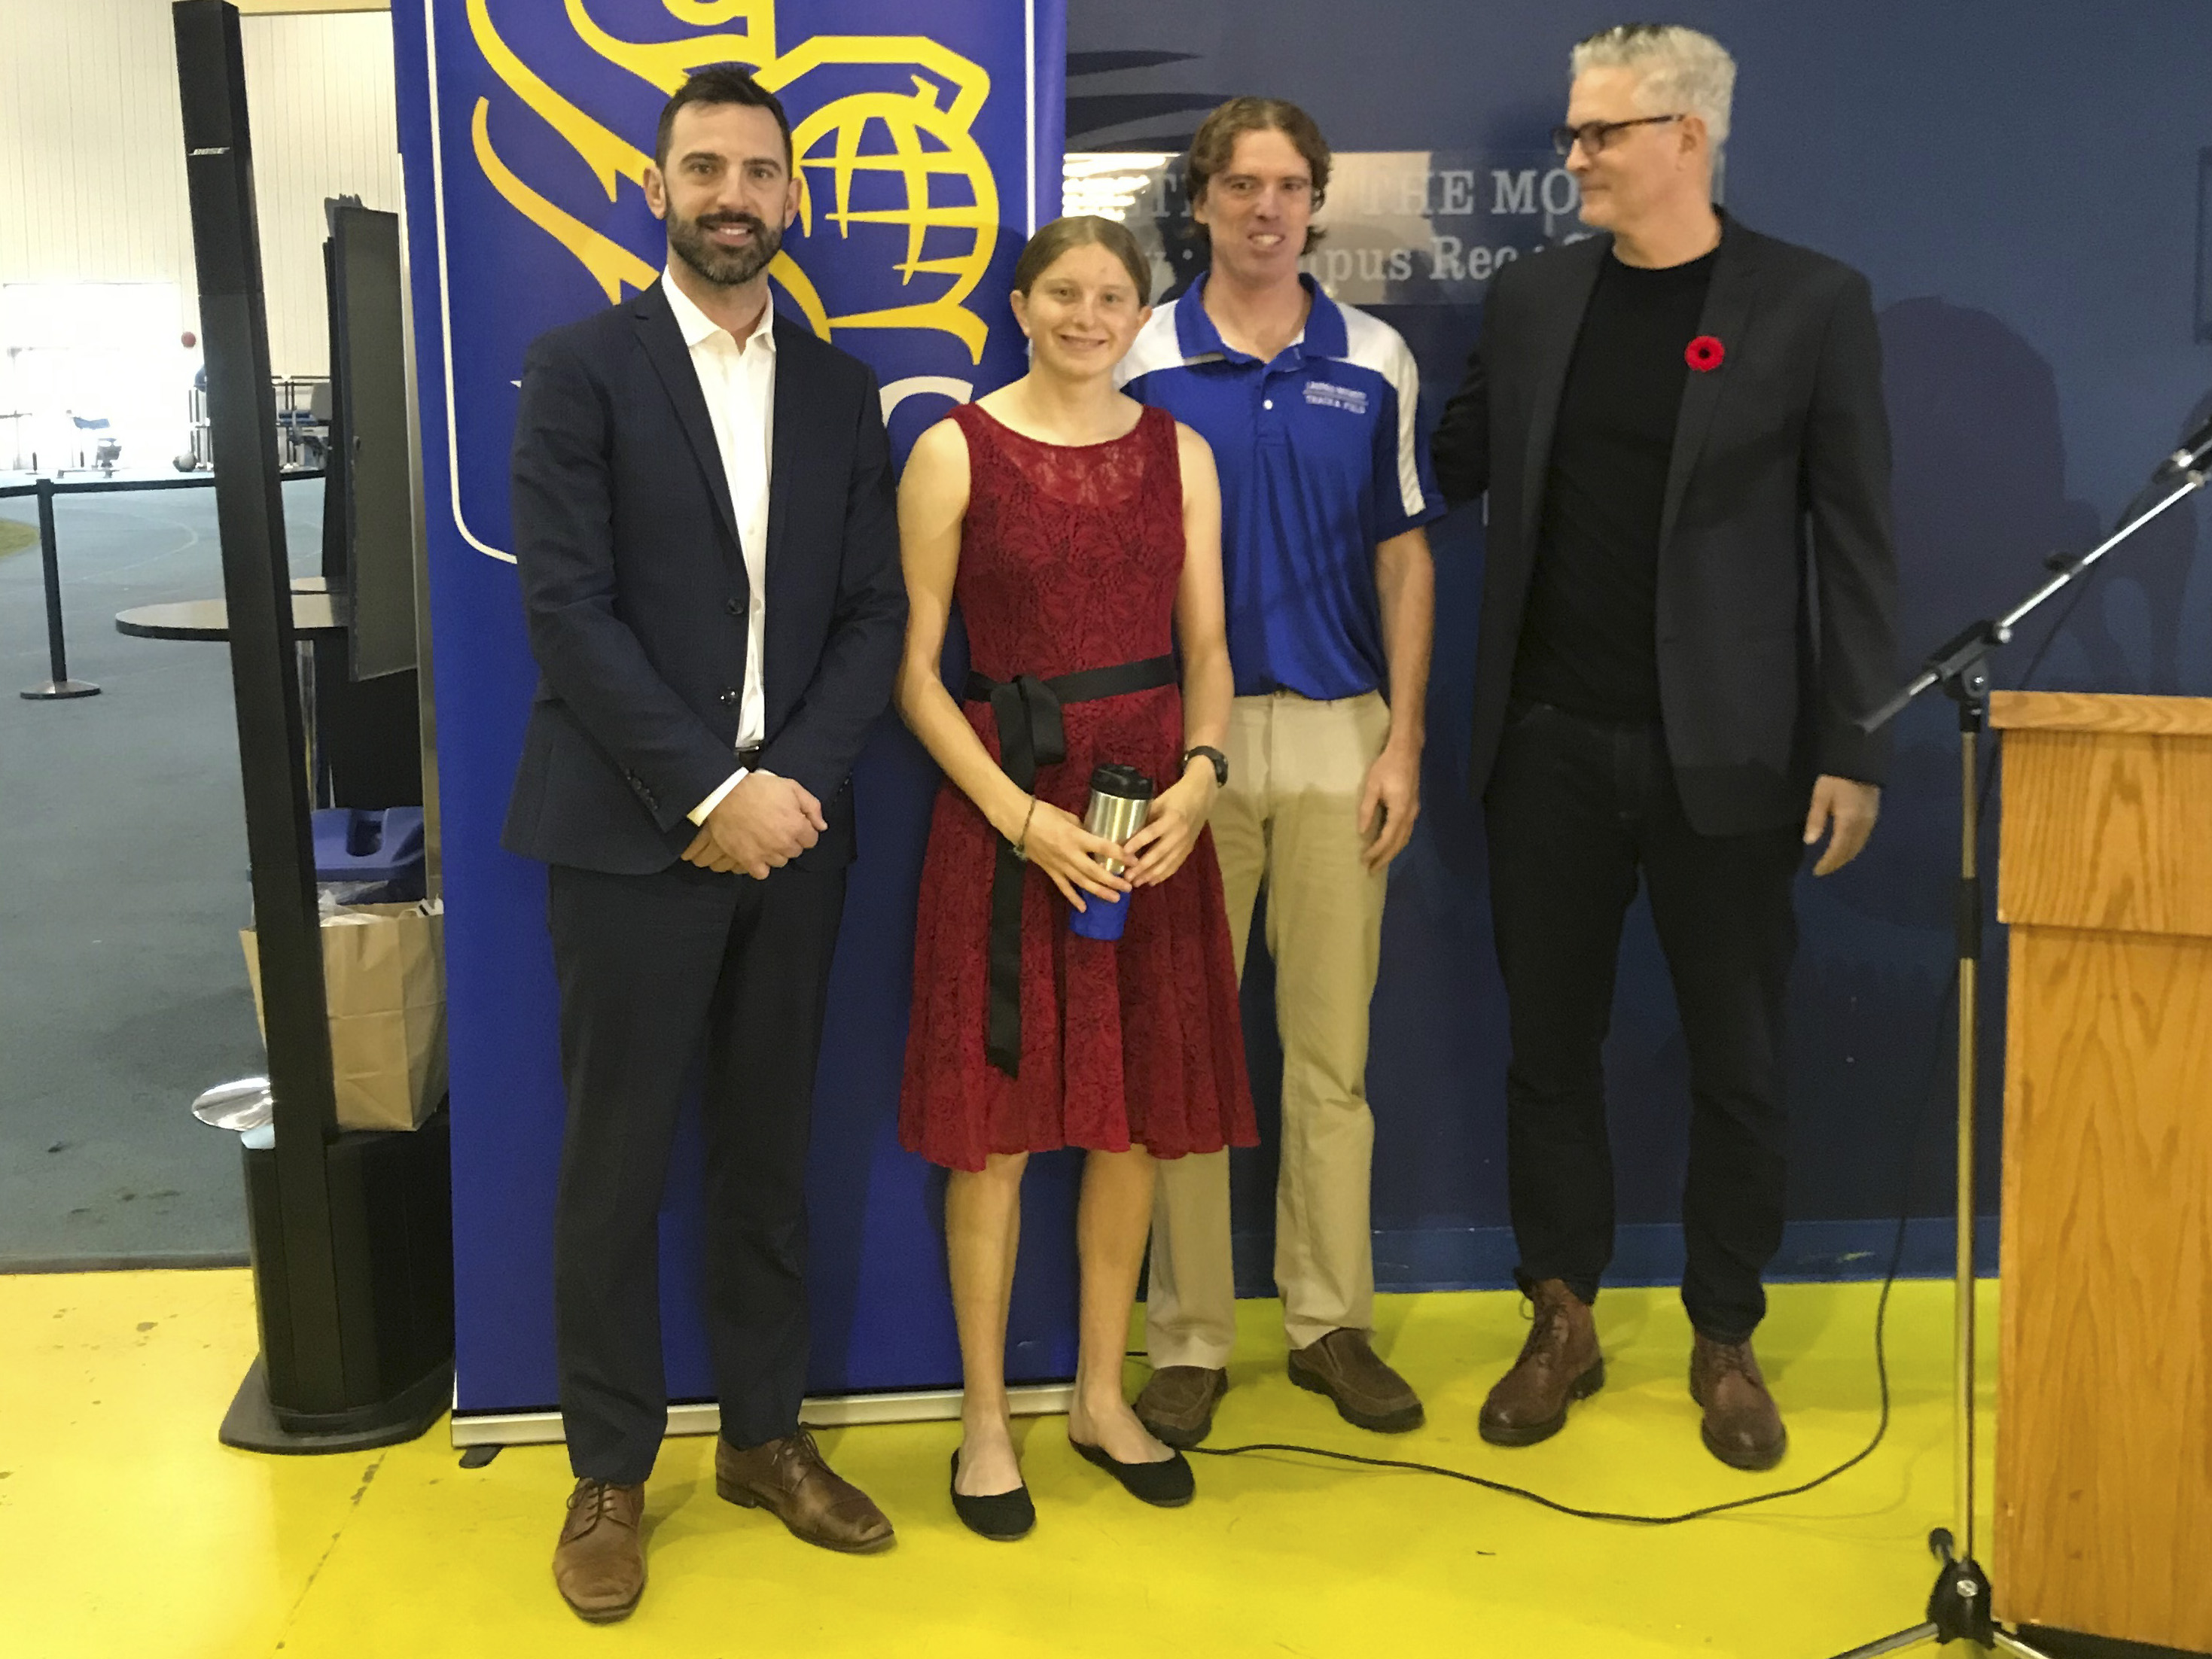 RBC Athlete of the Month - October 2019